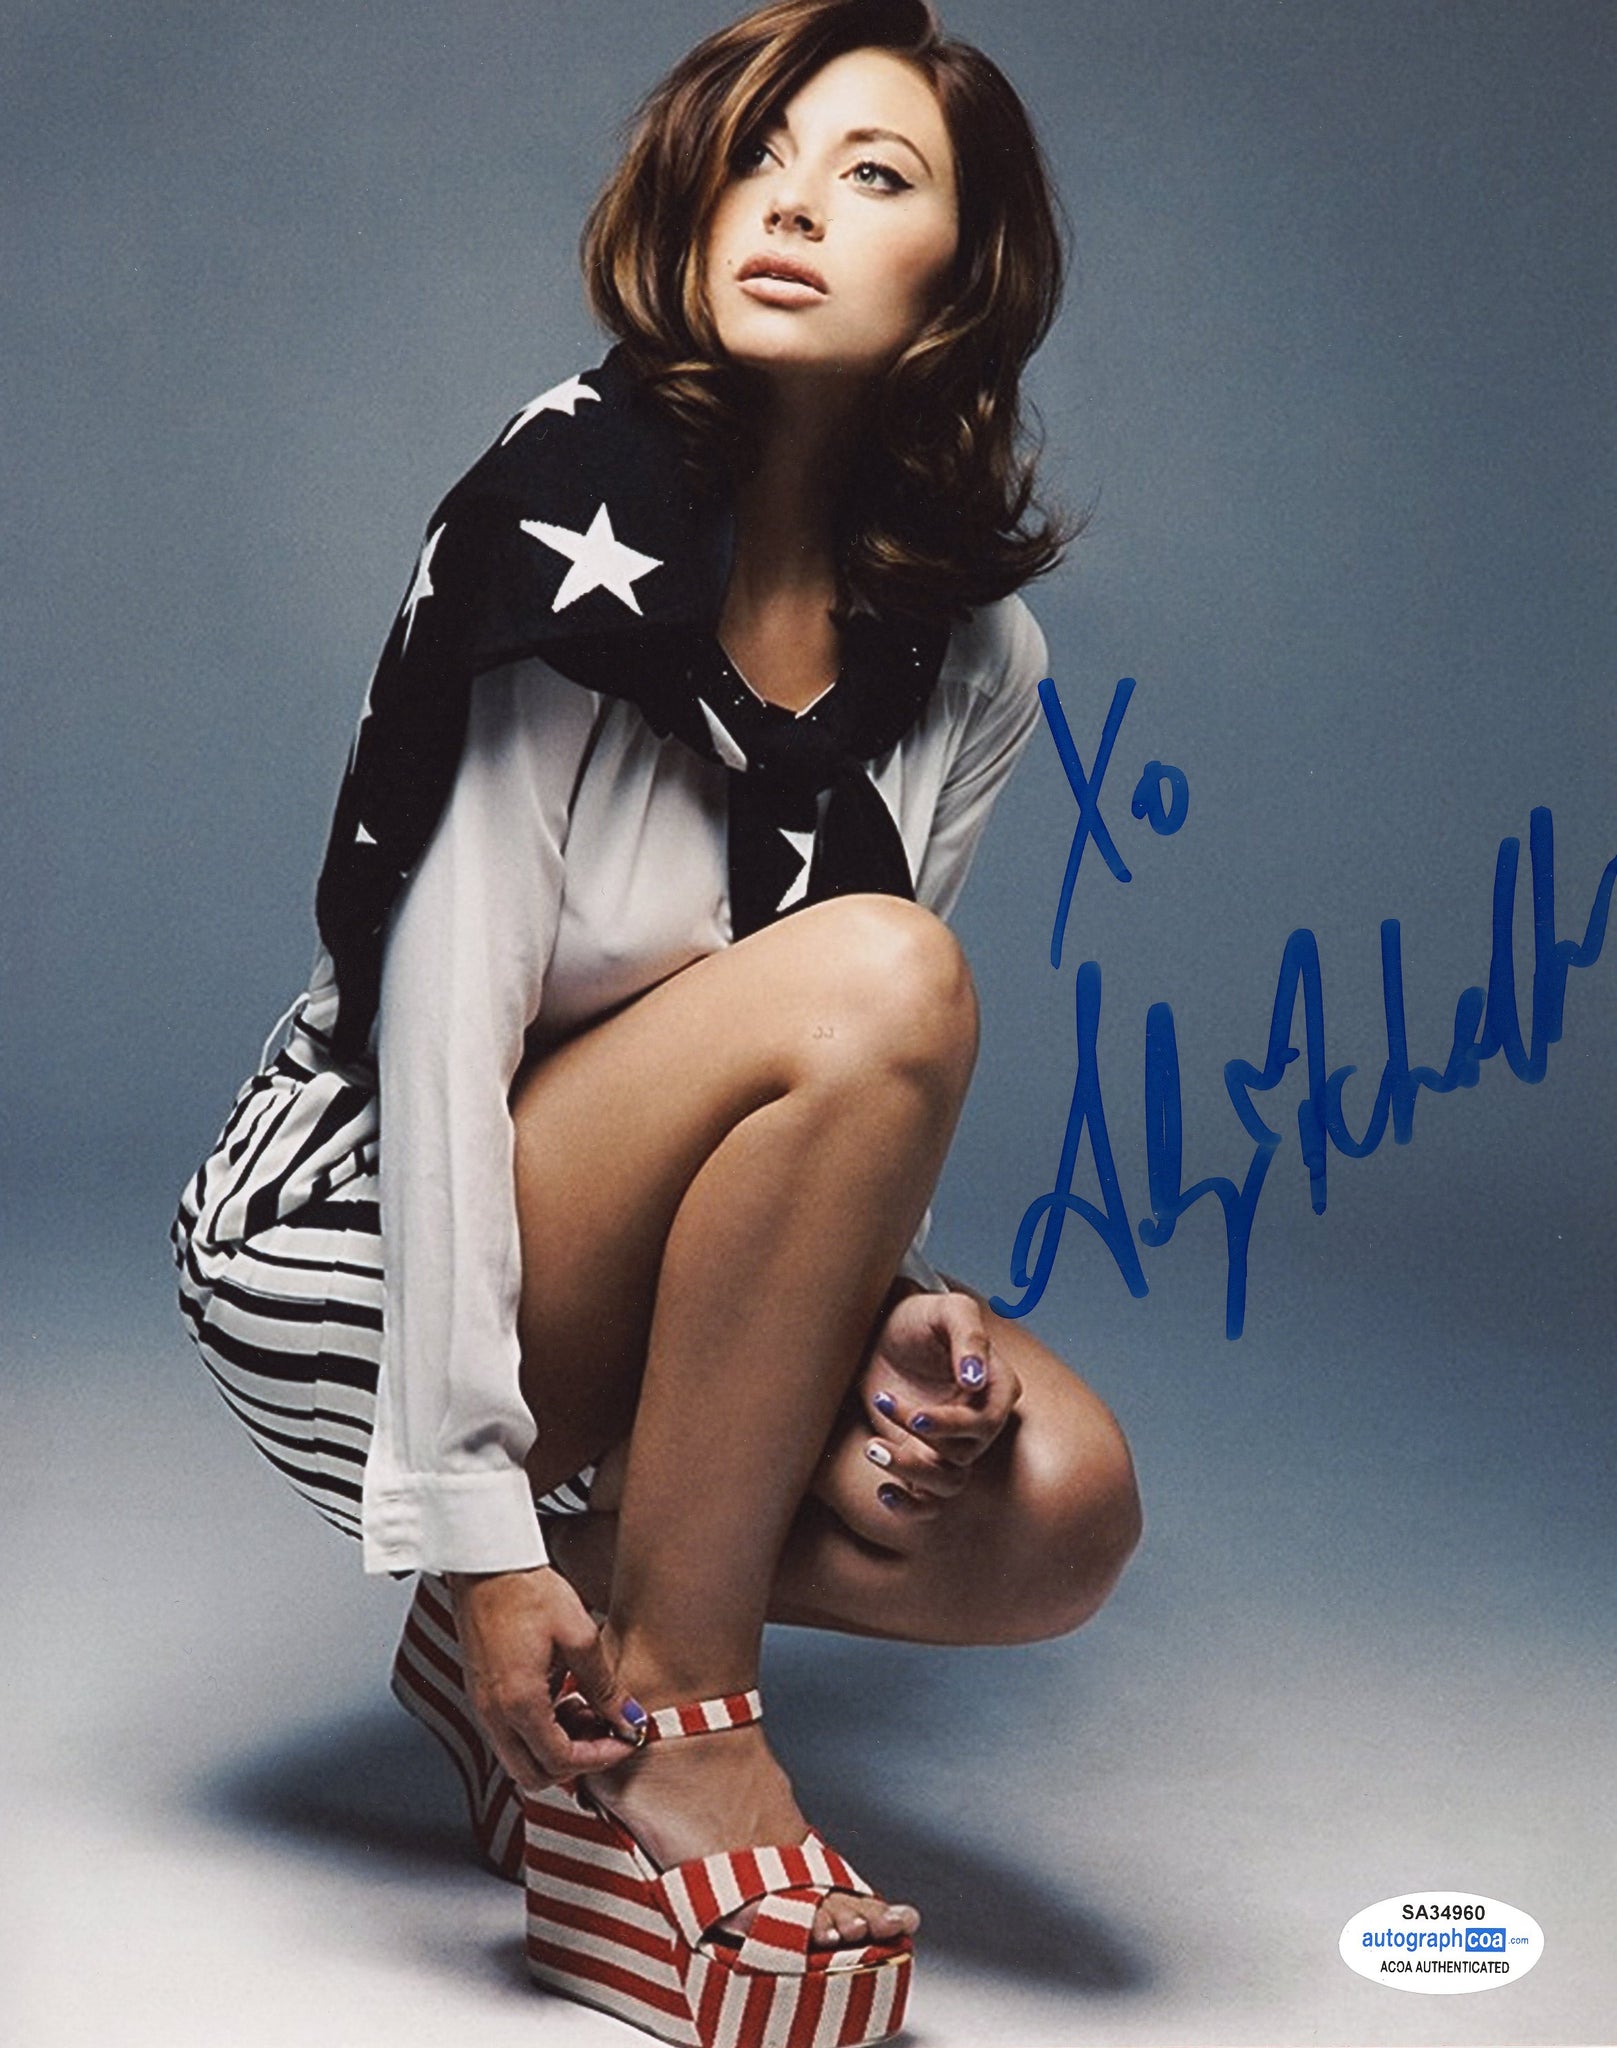 Aly Michalka Signed Autograph 8x10 Photo ACOA Sexy #2 - Outlaw Hobbies Authentic Autographs